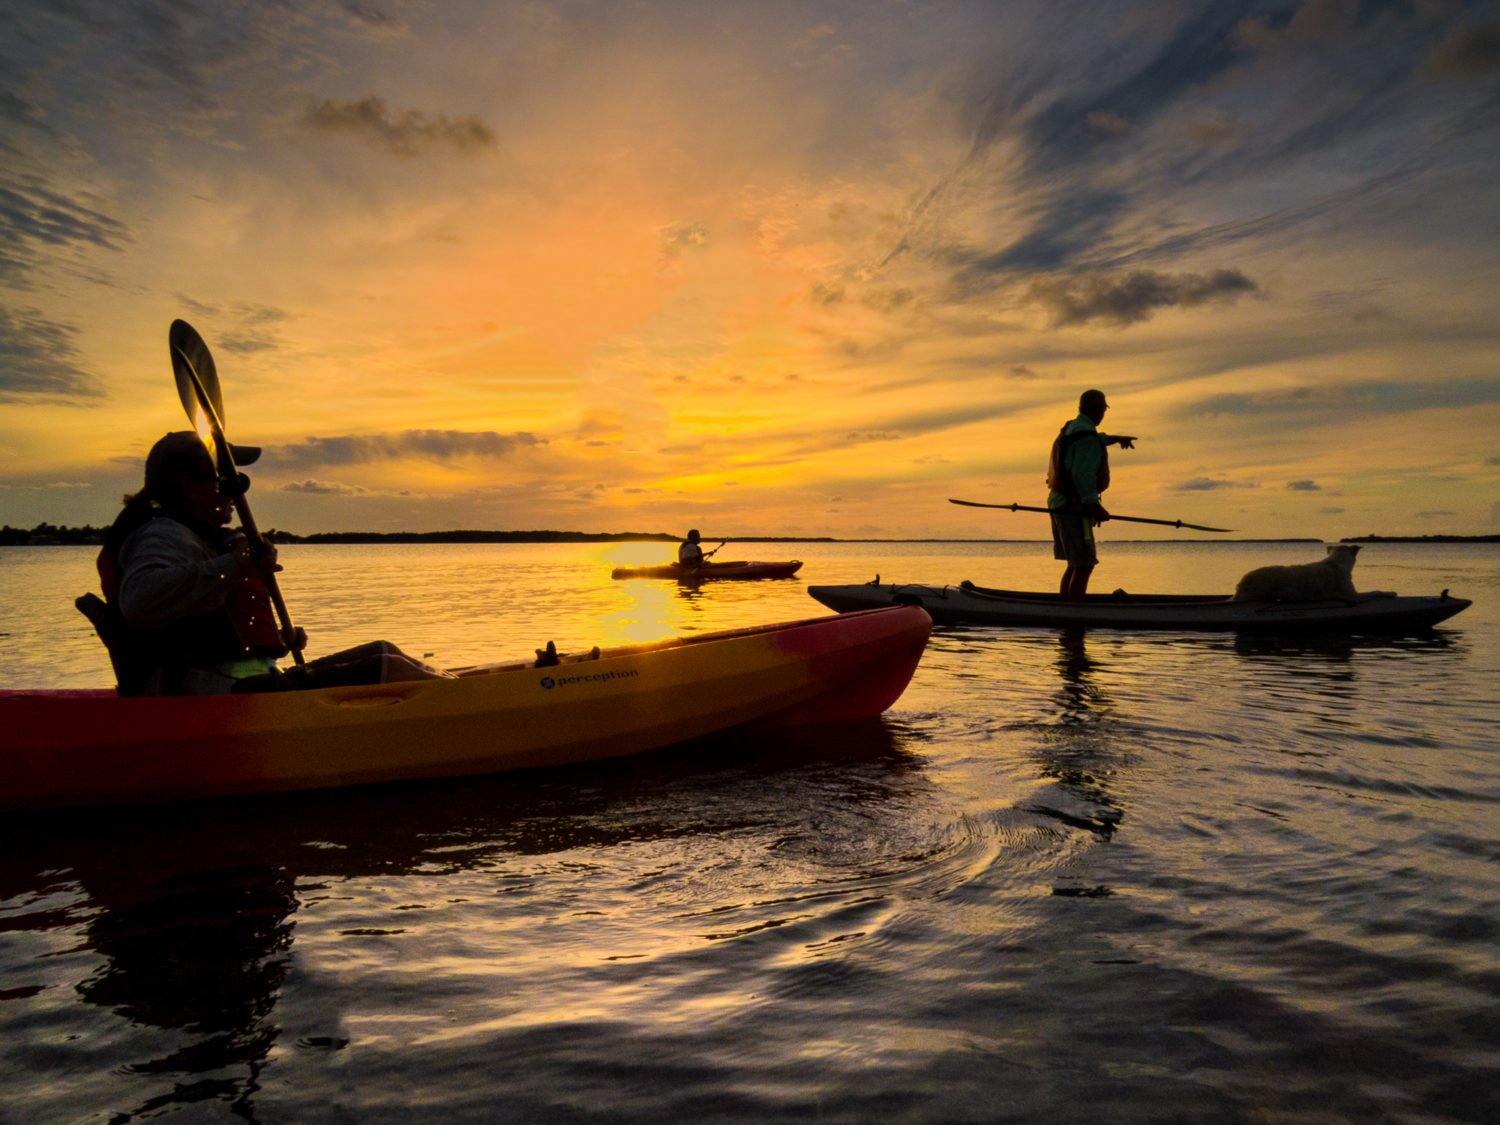 Creative Commons "Kayaking in Florida at Sunset" by U.S. Fish and Wildlife Service Southeast Region is licensed under CC BY 2.0